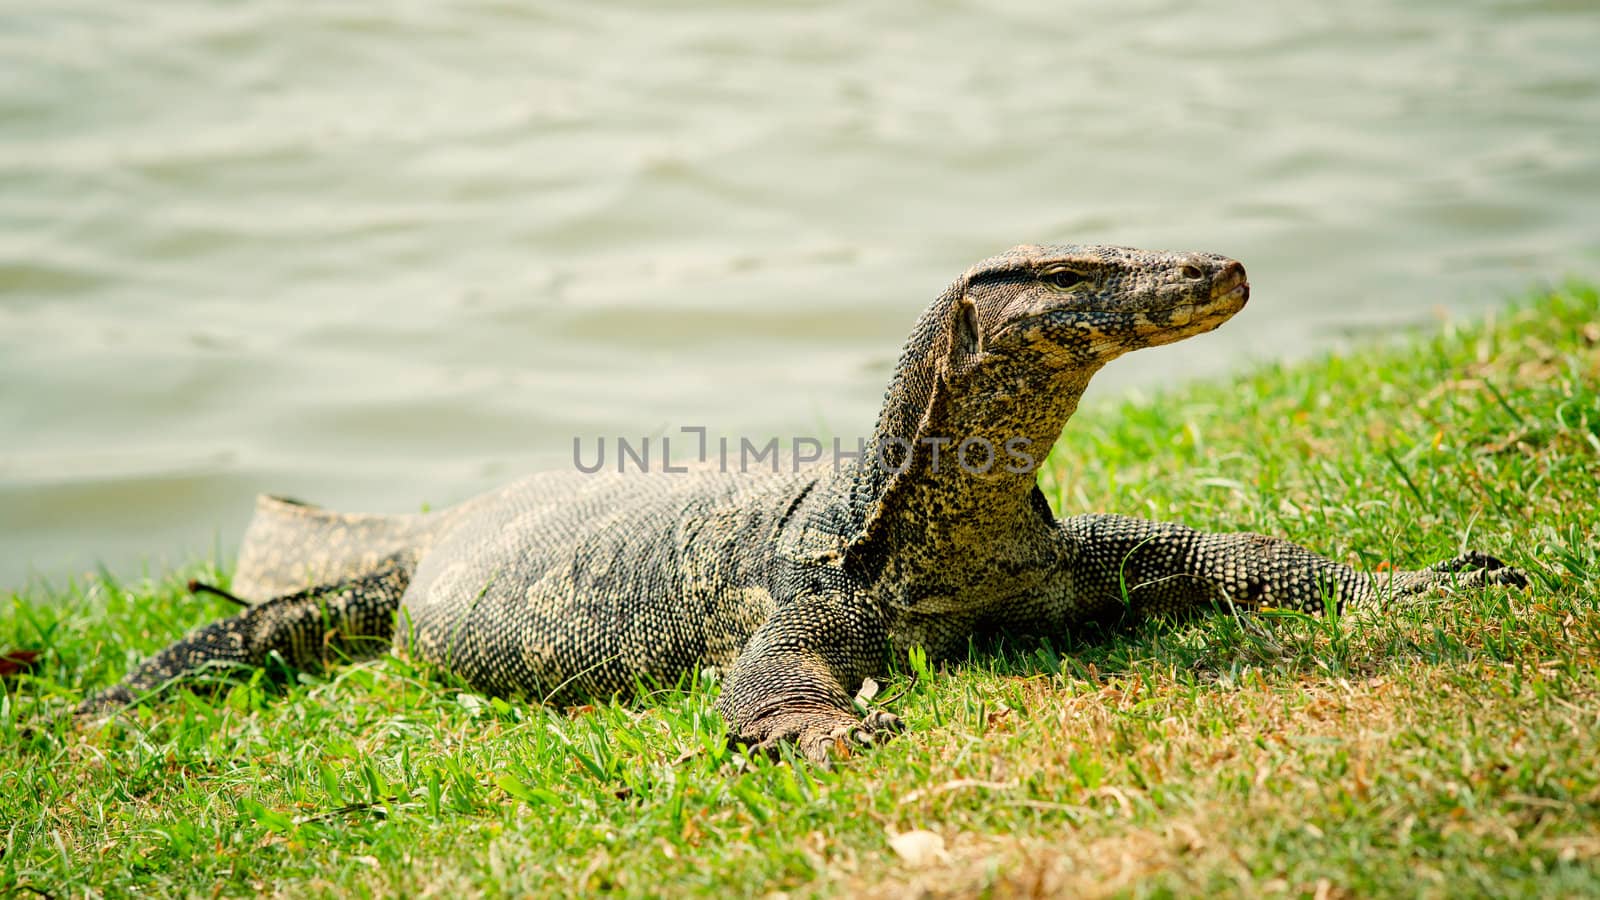 Large monitor lizard on the grass, close-up